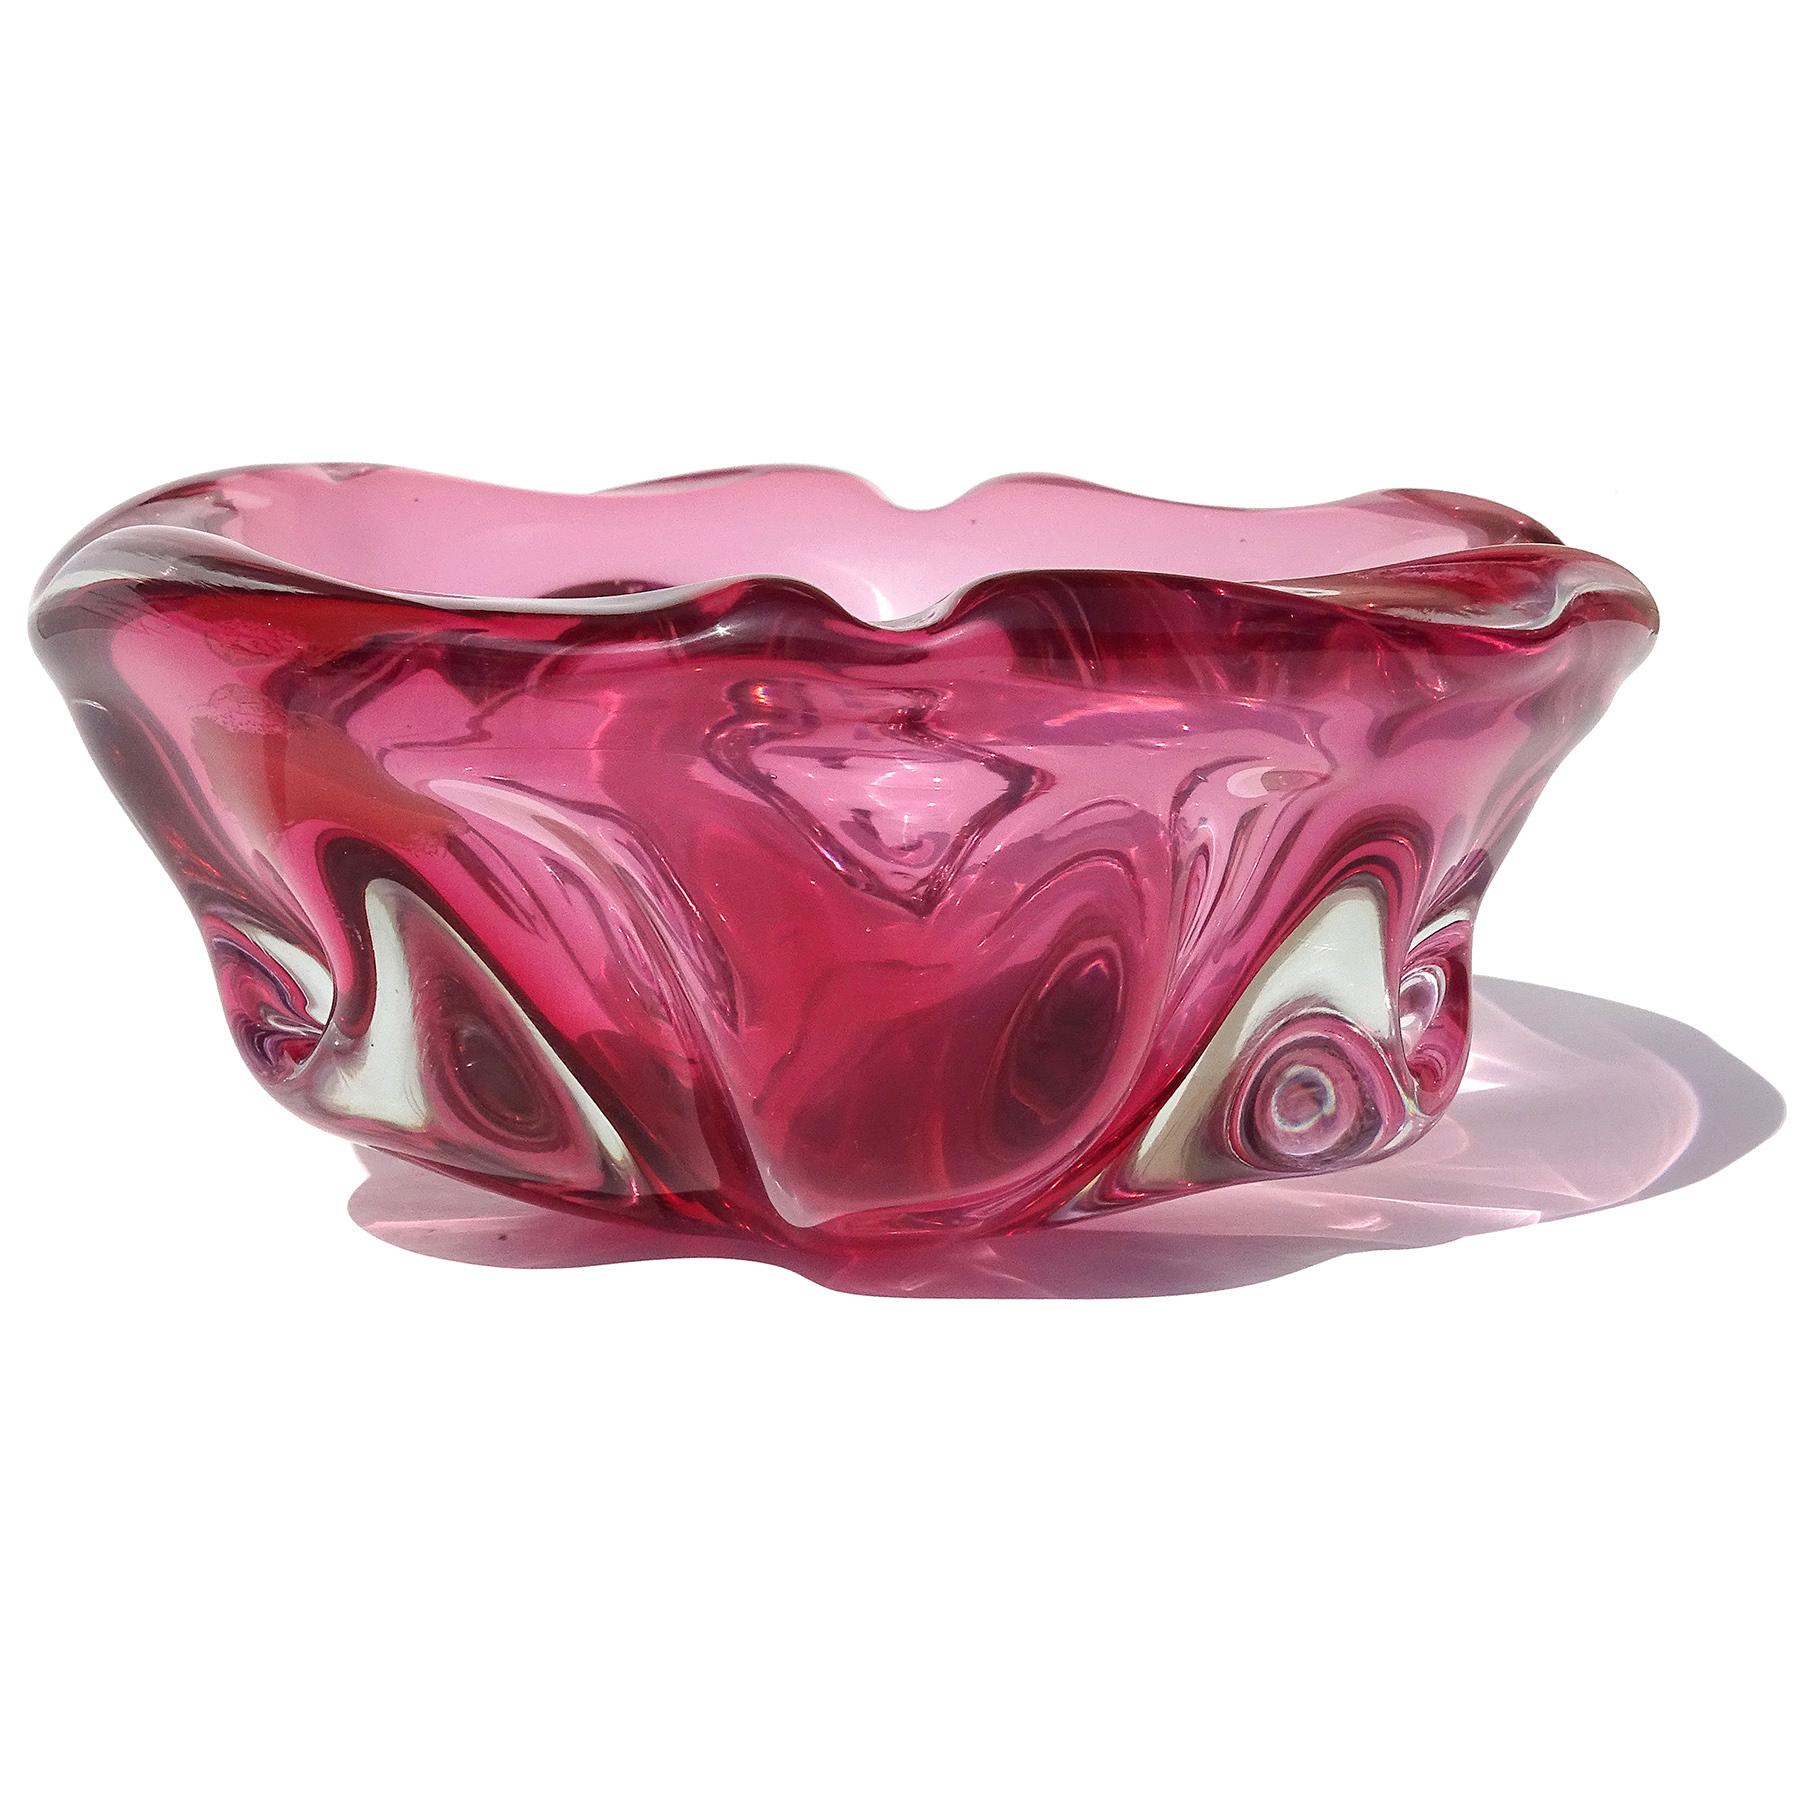 Hand-Crafted Barbini Murano Label Sommerso Pink Italian Art Glass Decorative Bowl Ashtray For Sale